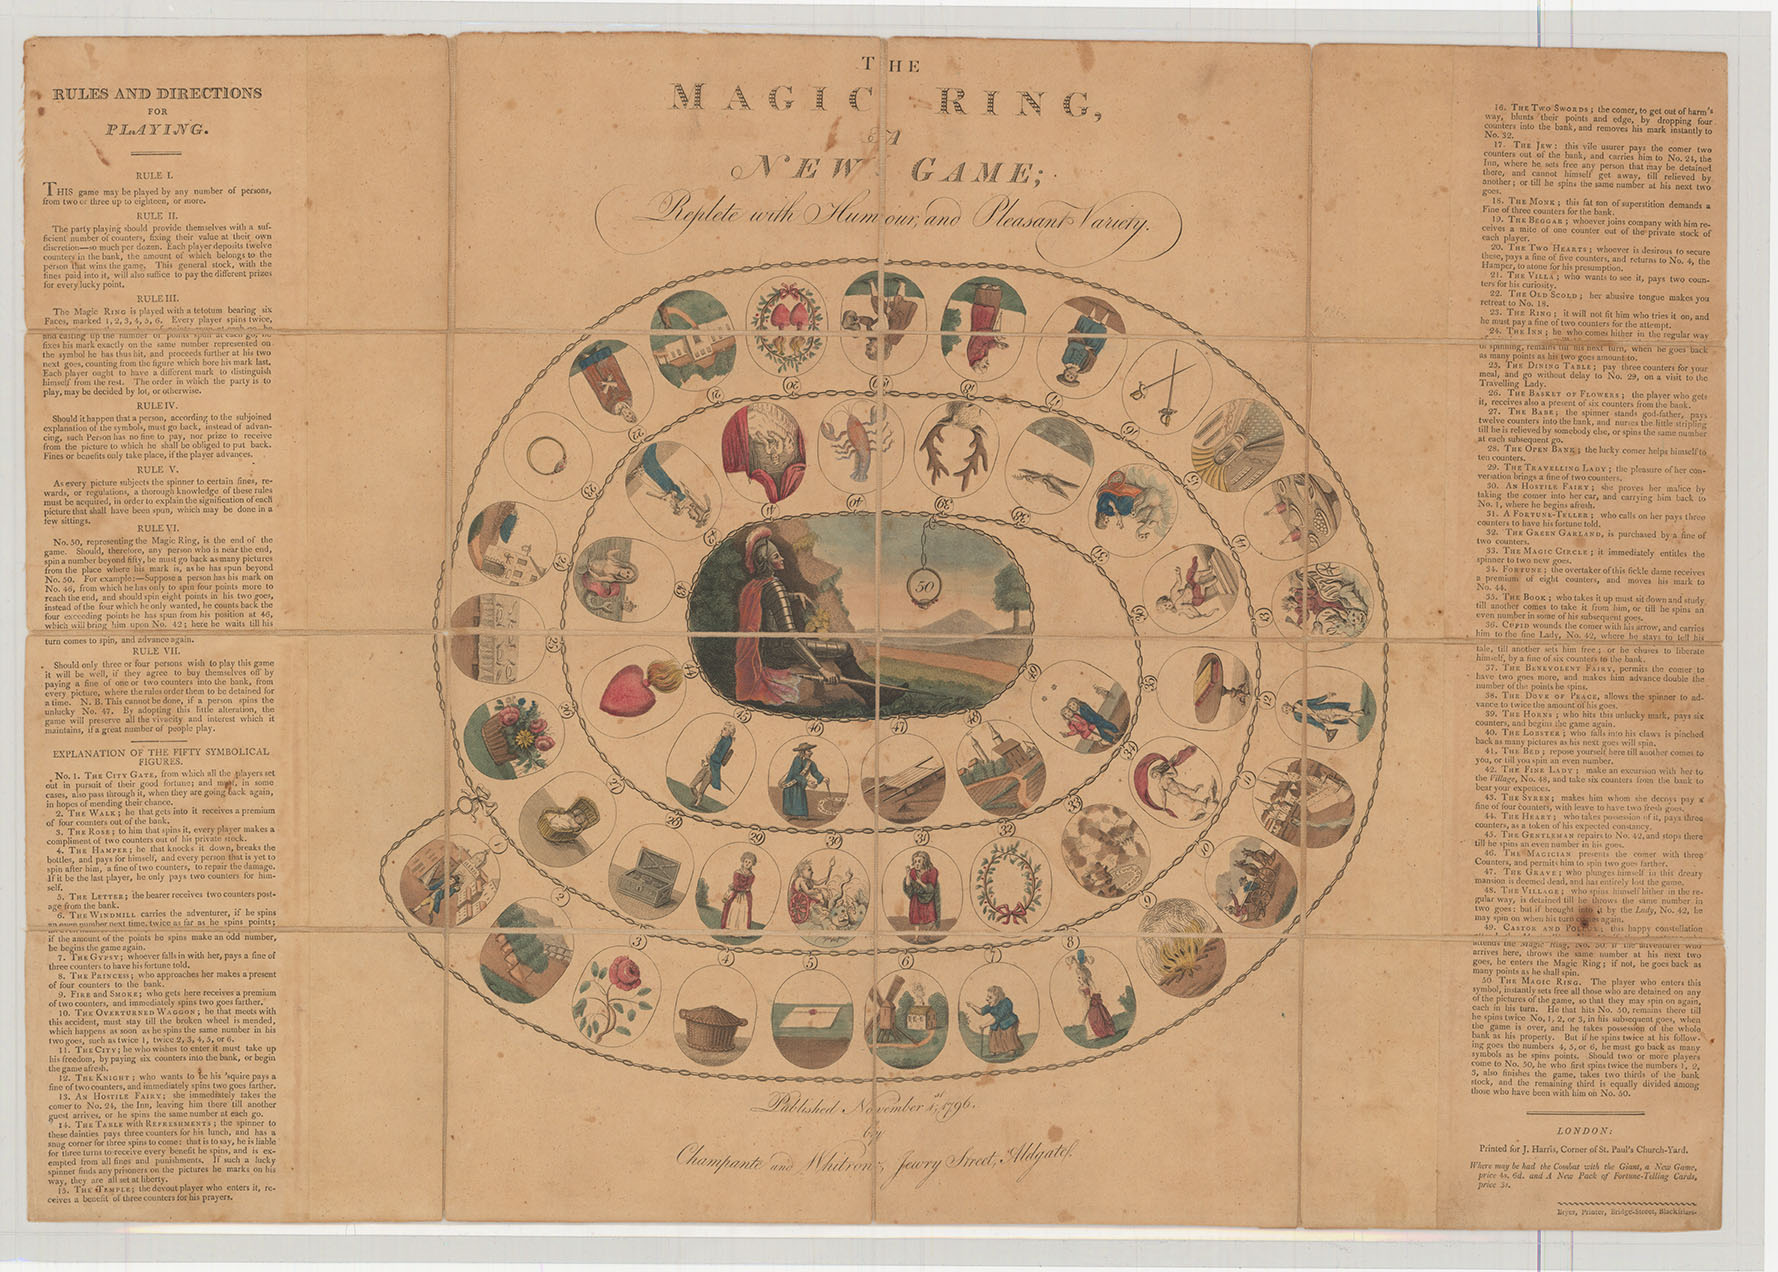 The Magic Ring - a fantasy-esque board game published in 1796.